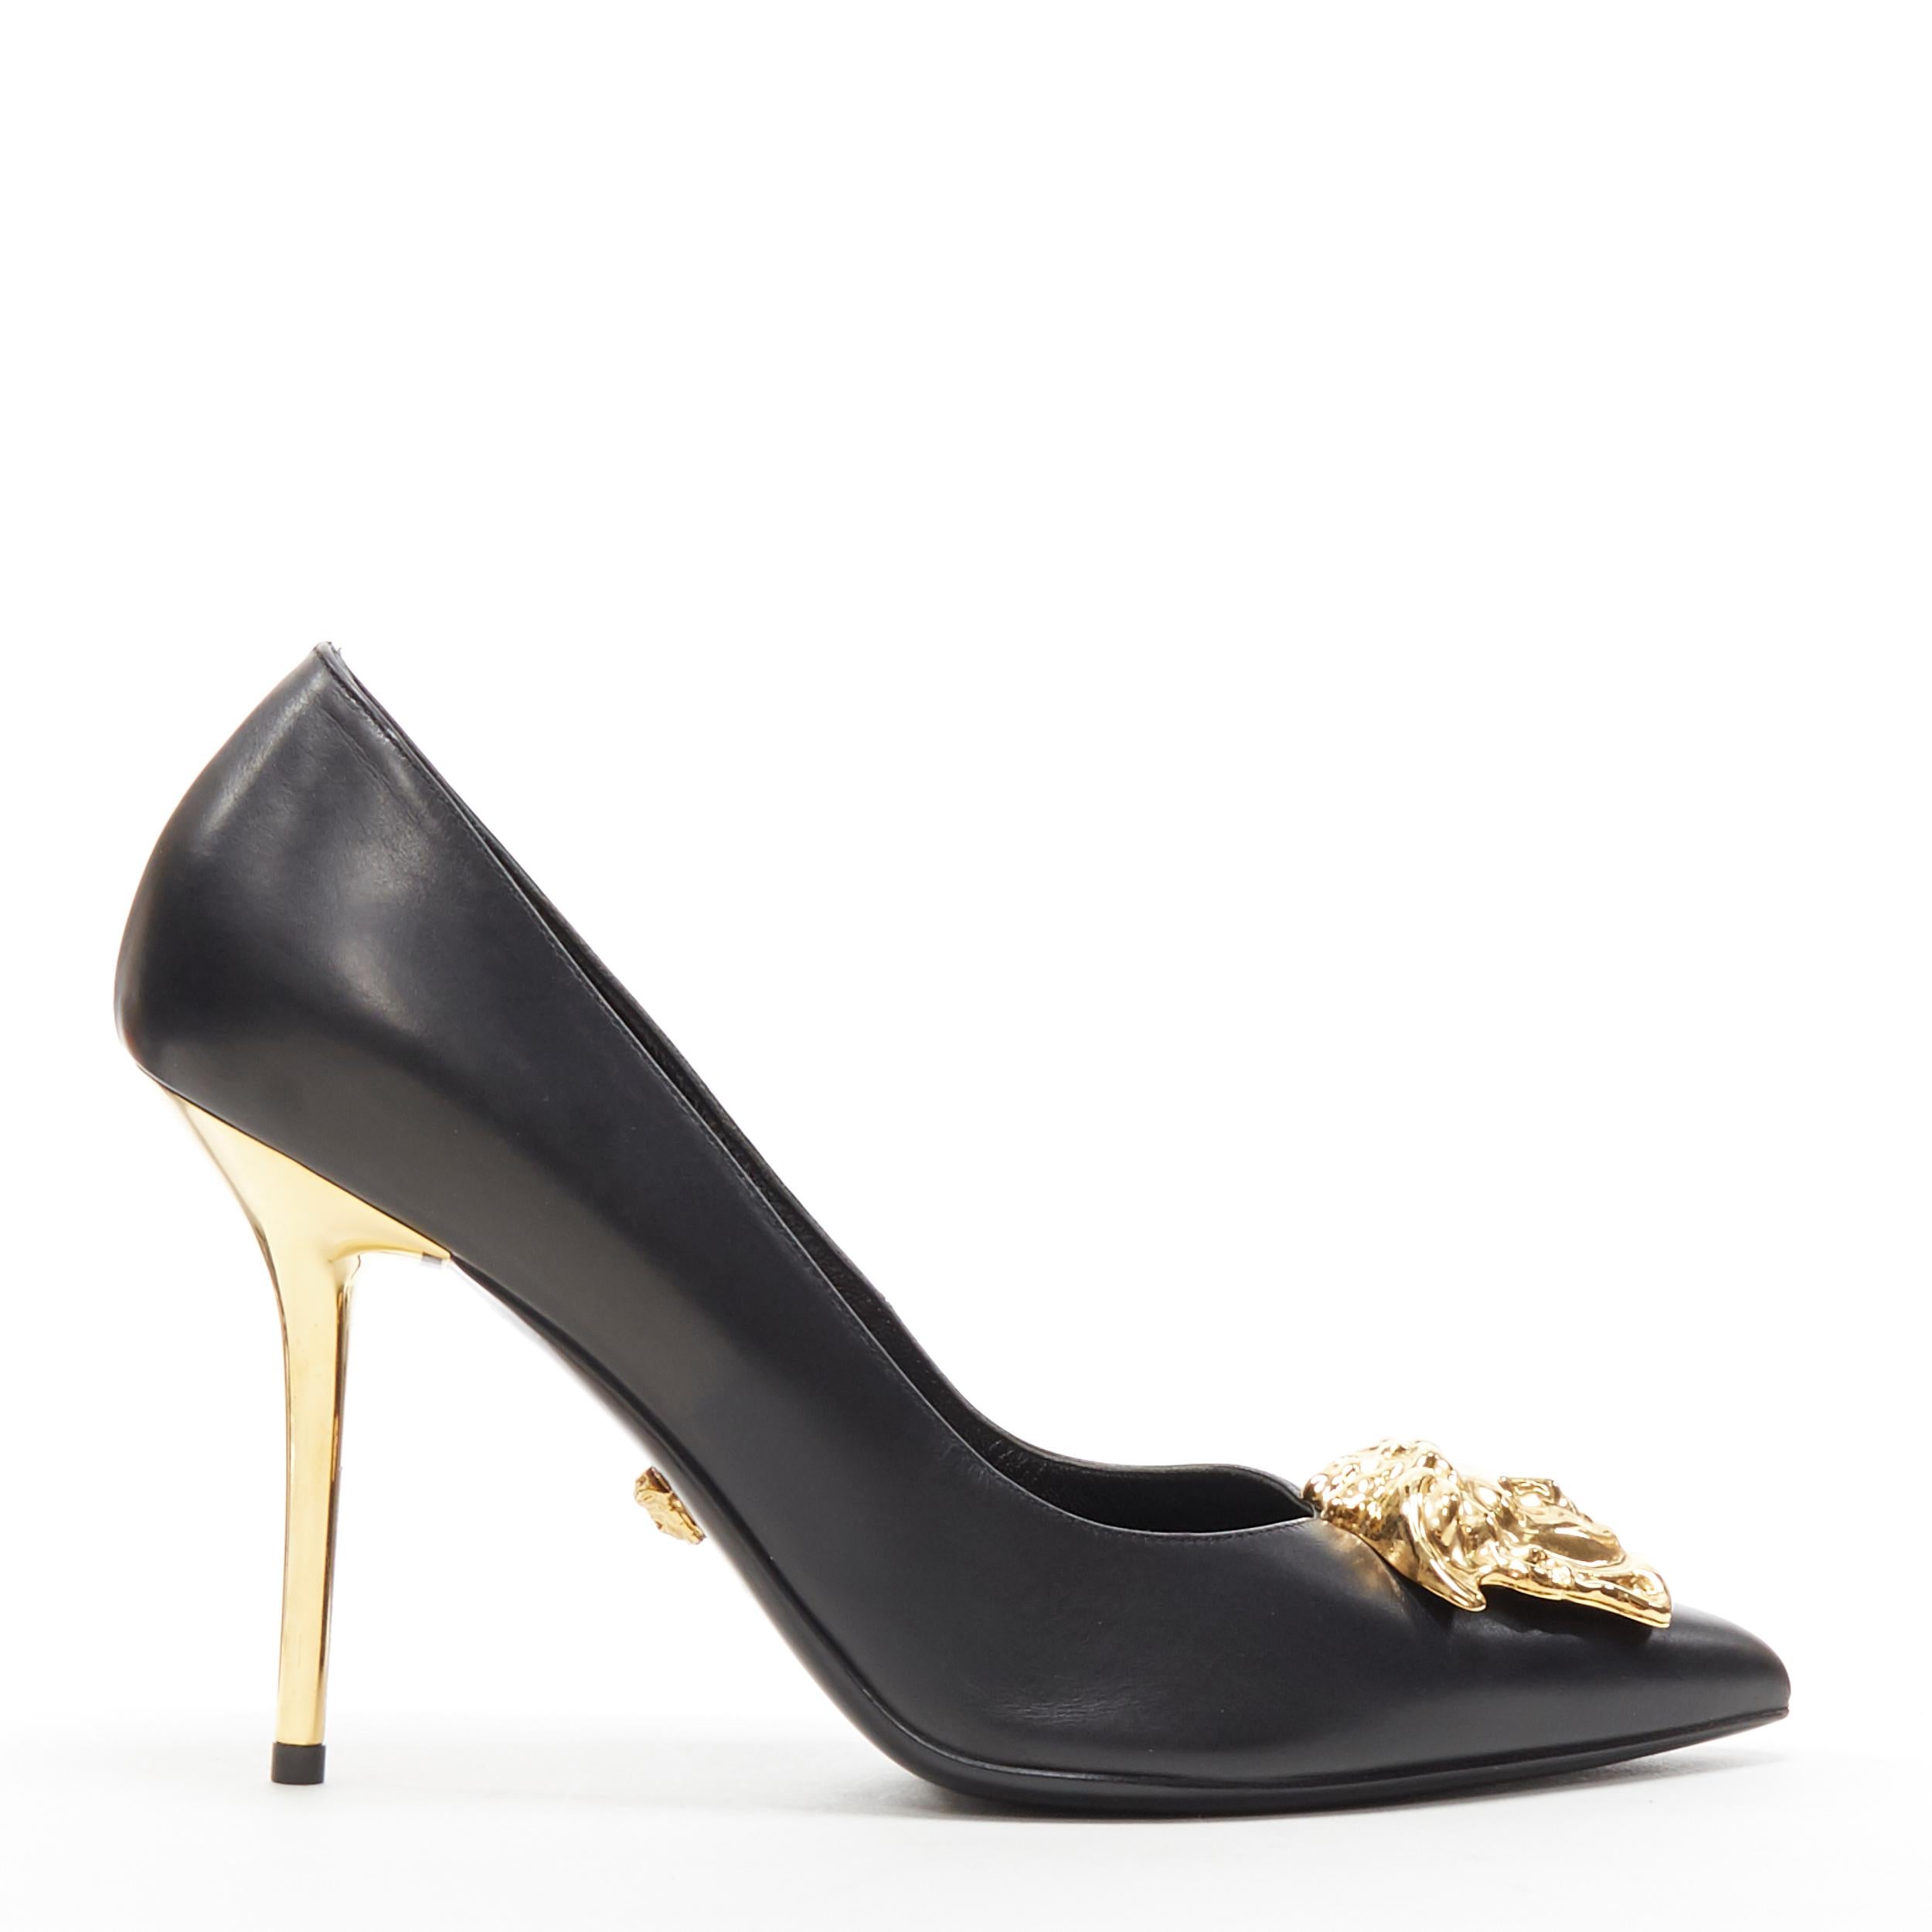 new VERSACE Palazzo Medusa black champagne gold metal heel pigalle pump EU39
Brand: Versace
Designer: Donatella Versace
Collection: 2019
Model Name / Style: Medusa pump
Material: Leather
Color: Black
Pattern: Solid
Extra Detail: Calf leather upper.